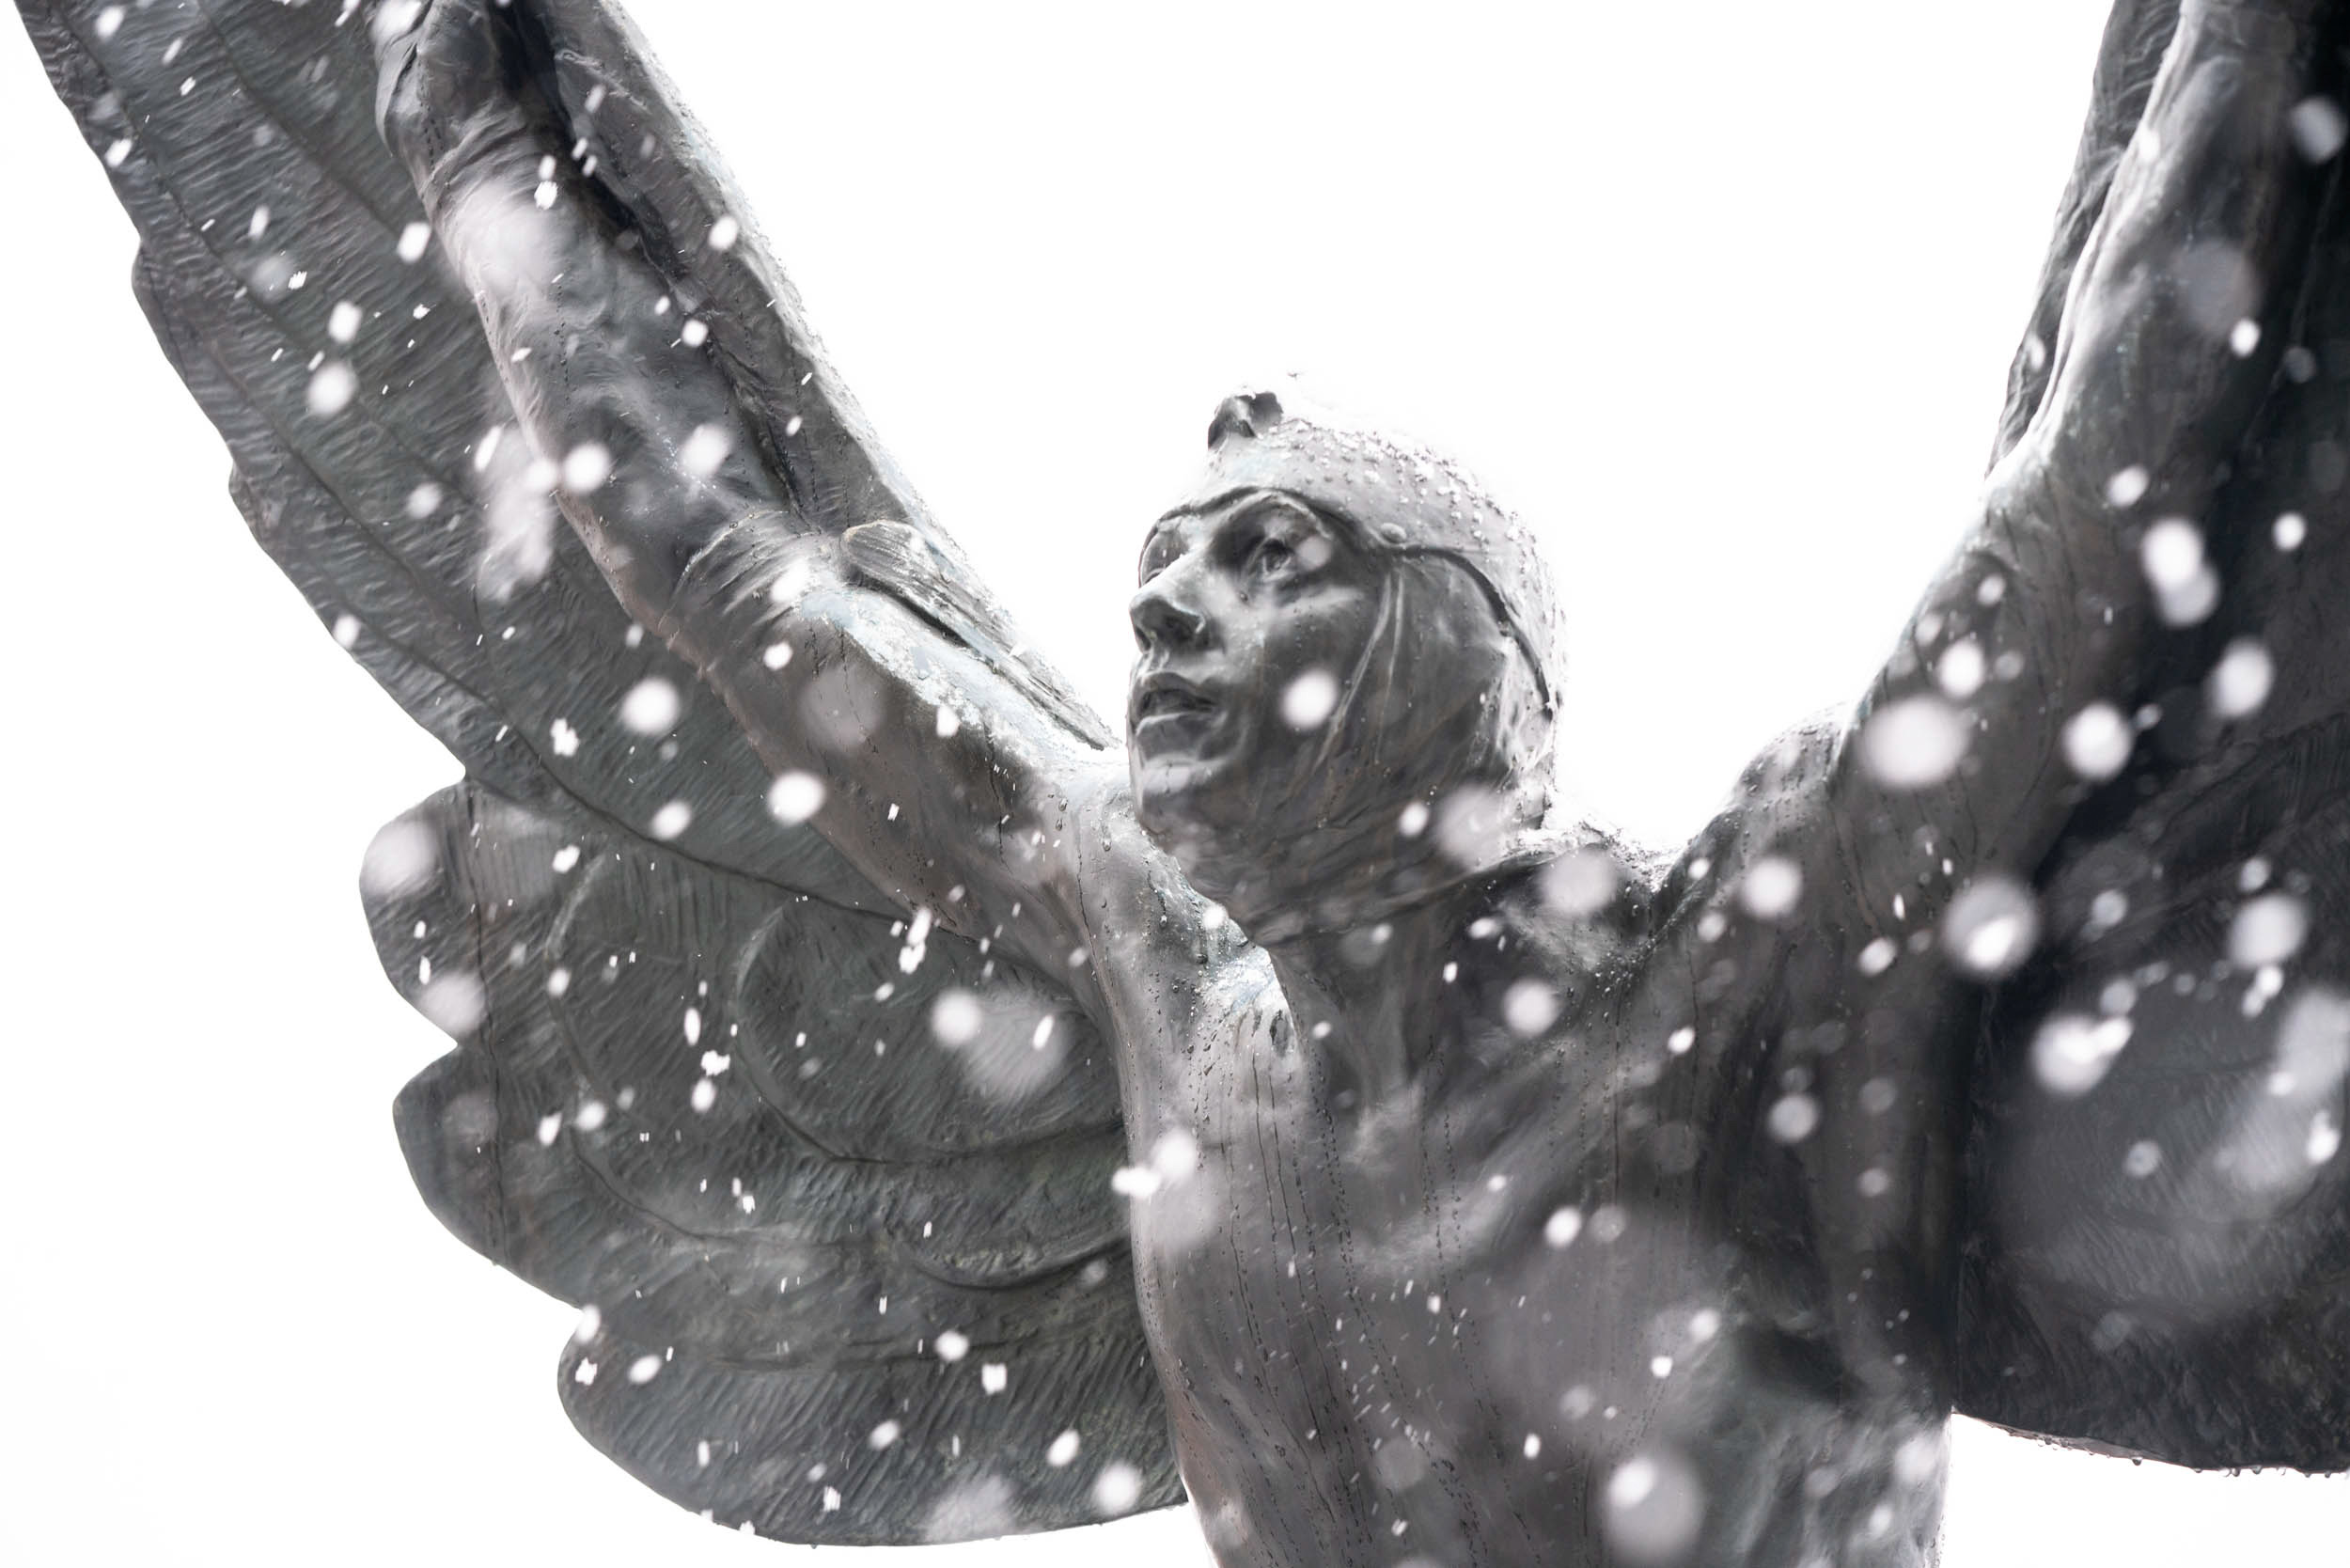 The Aviator against a snowy sky as snow covers him and falls around him